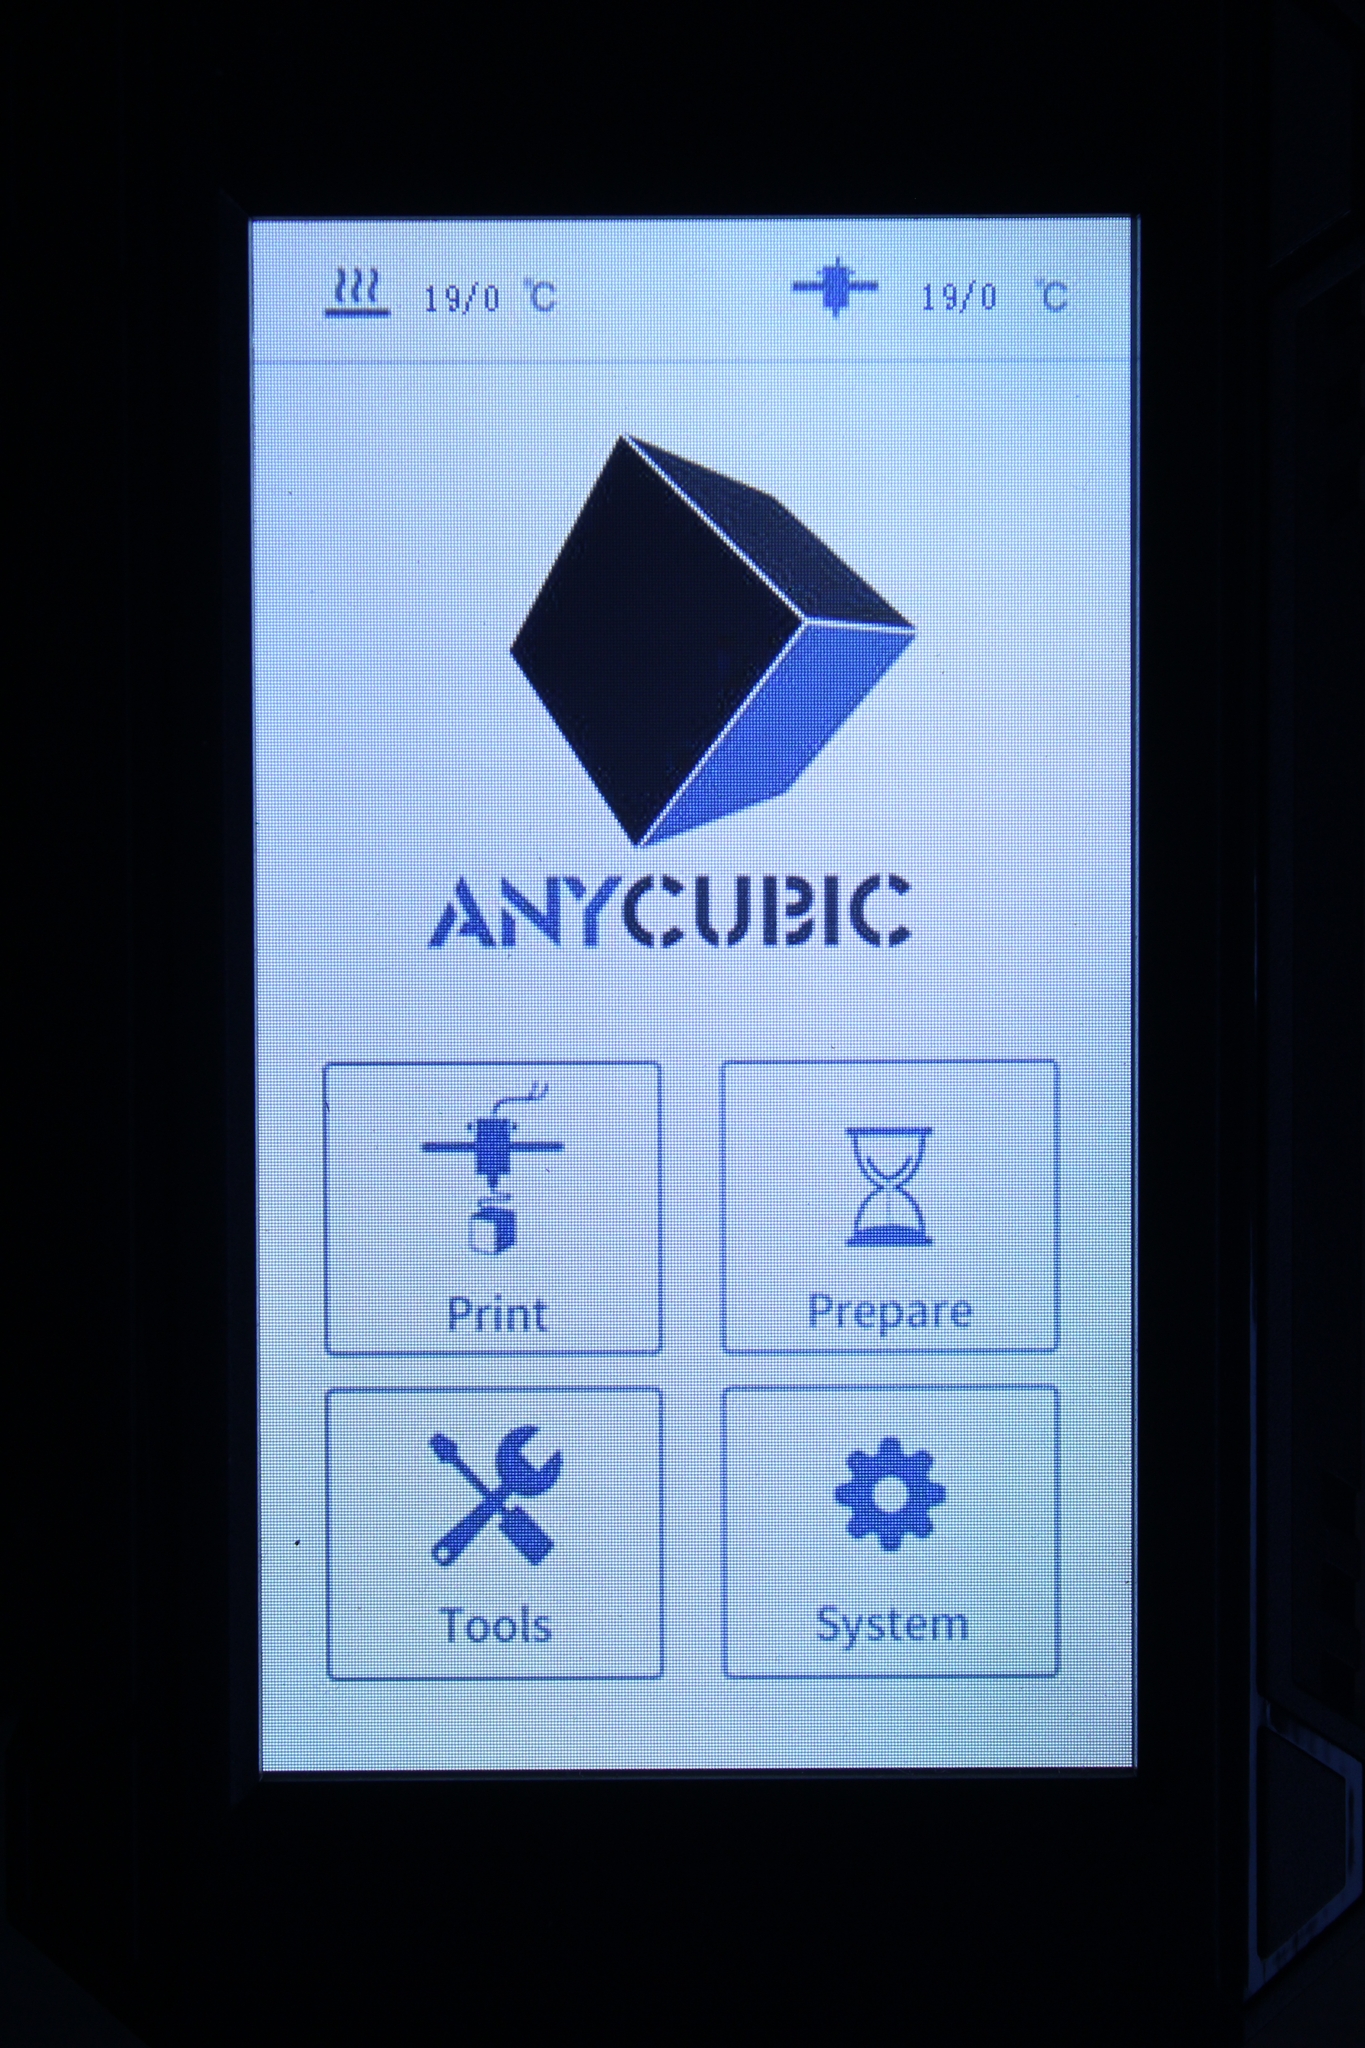 Anycubic Kobra Touchscreen Interface2 | Anycubic Kobra Review: The New Budget Standard